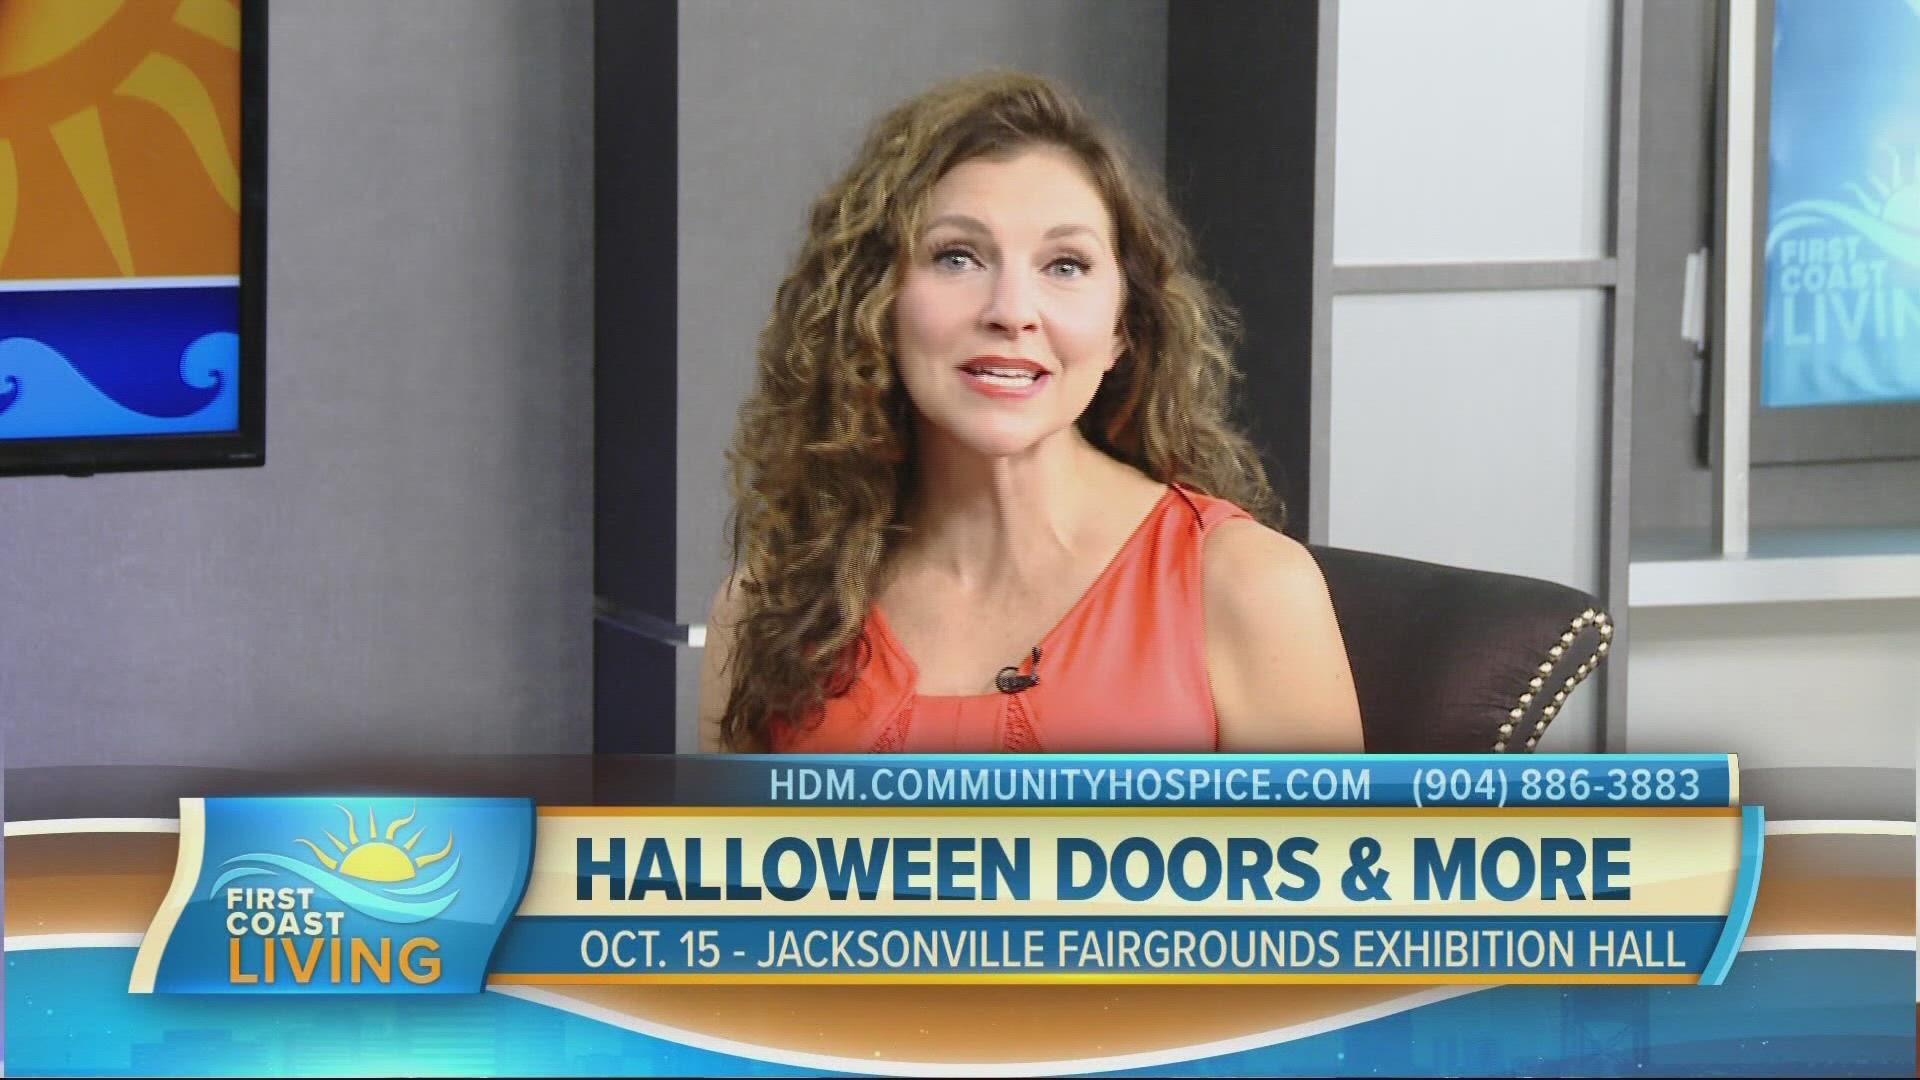 The 18th Annual Community Hospice & Palliative Care Halloween Doors & More fundraiser is Oct. 15th from 2-7 p.m. at the Jacksonville Fairgrounds Exhibition Hall.